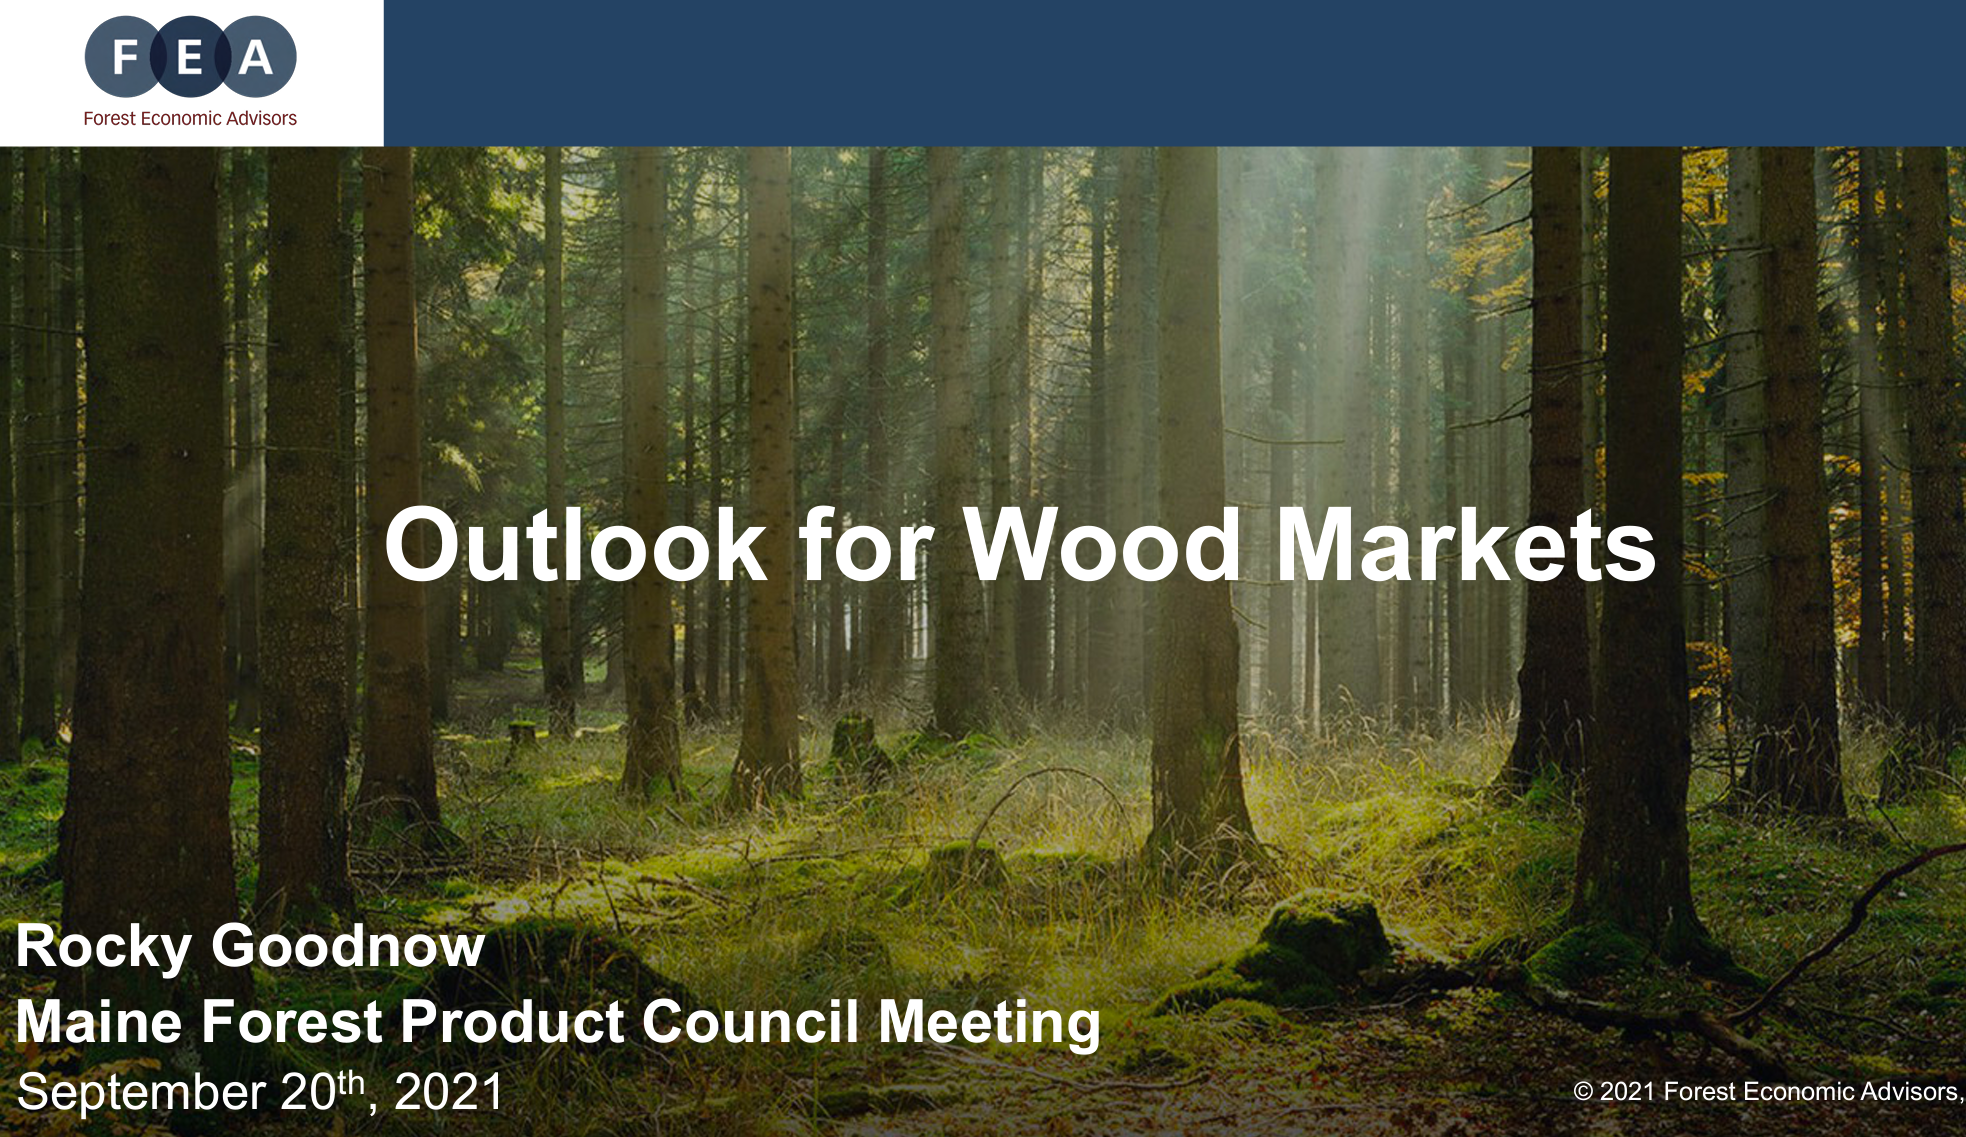 Outlook for wood markets